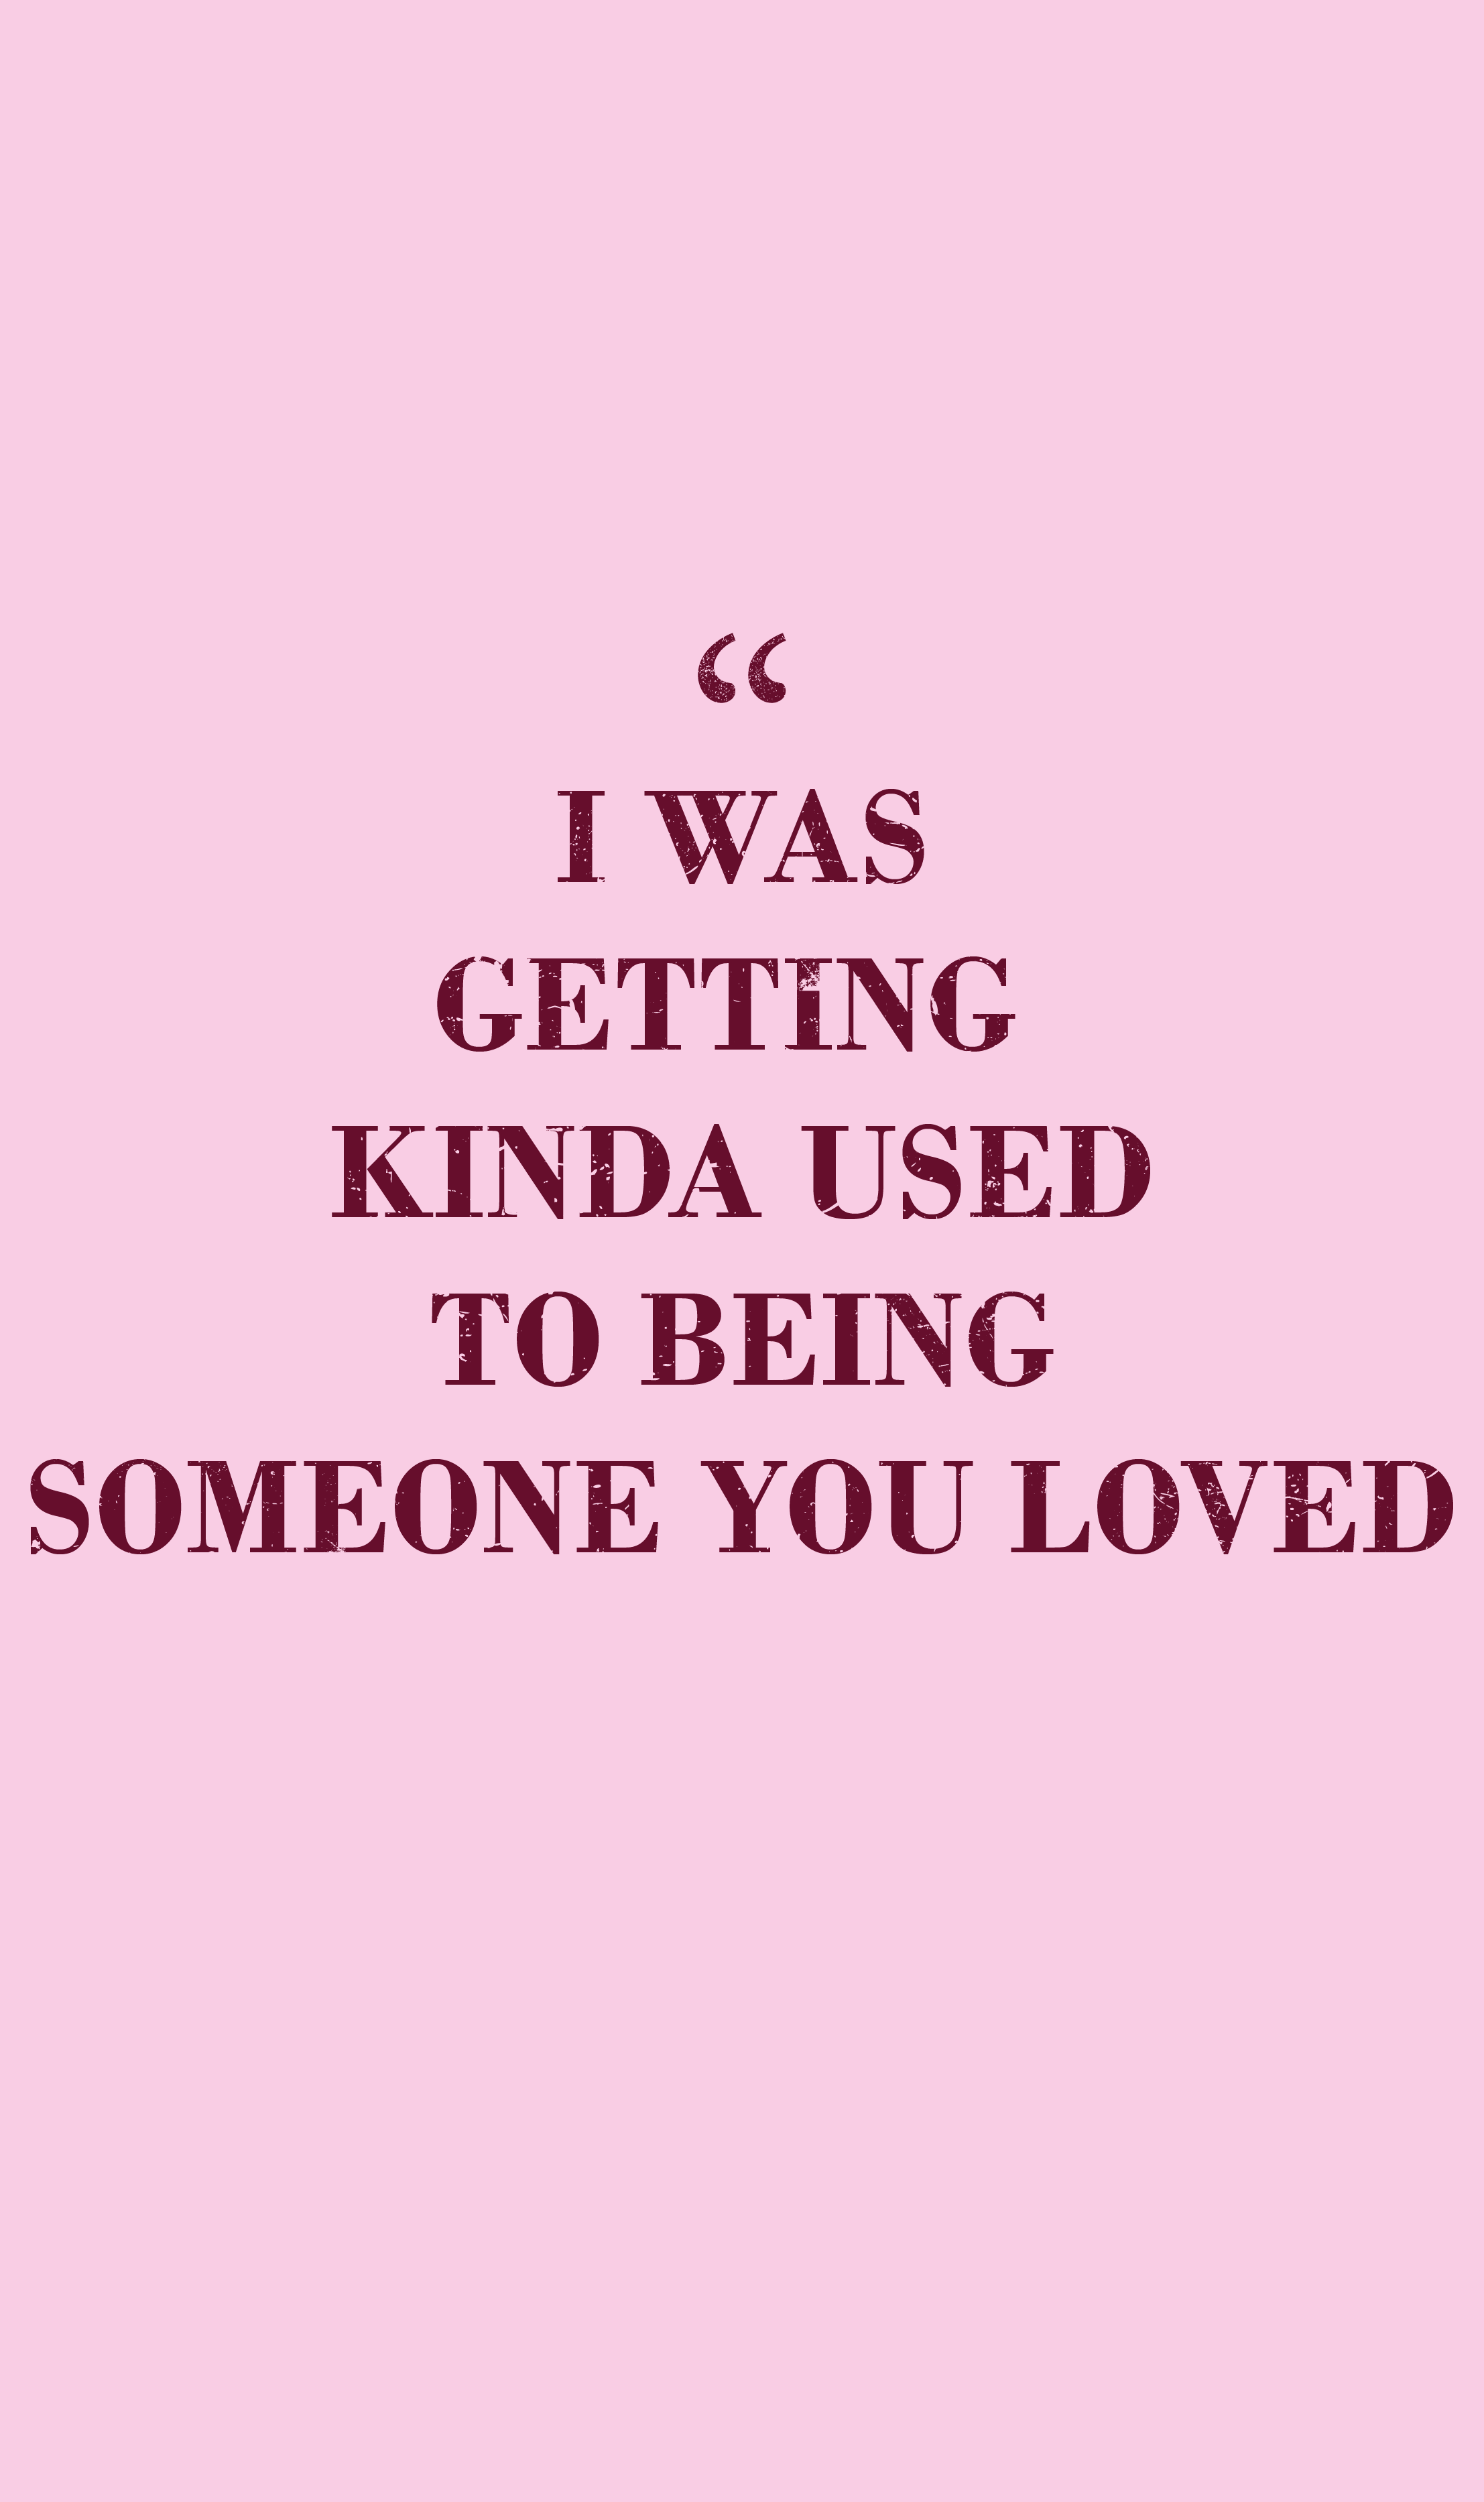 Quote from Someone You Loved by Lewis Capaldi. Song lyrics